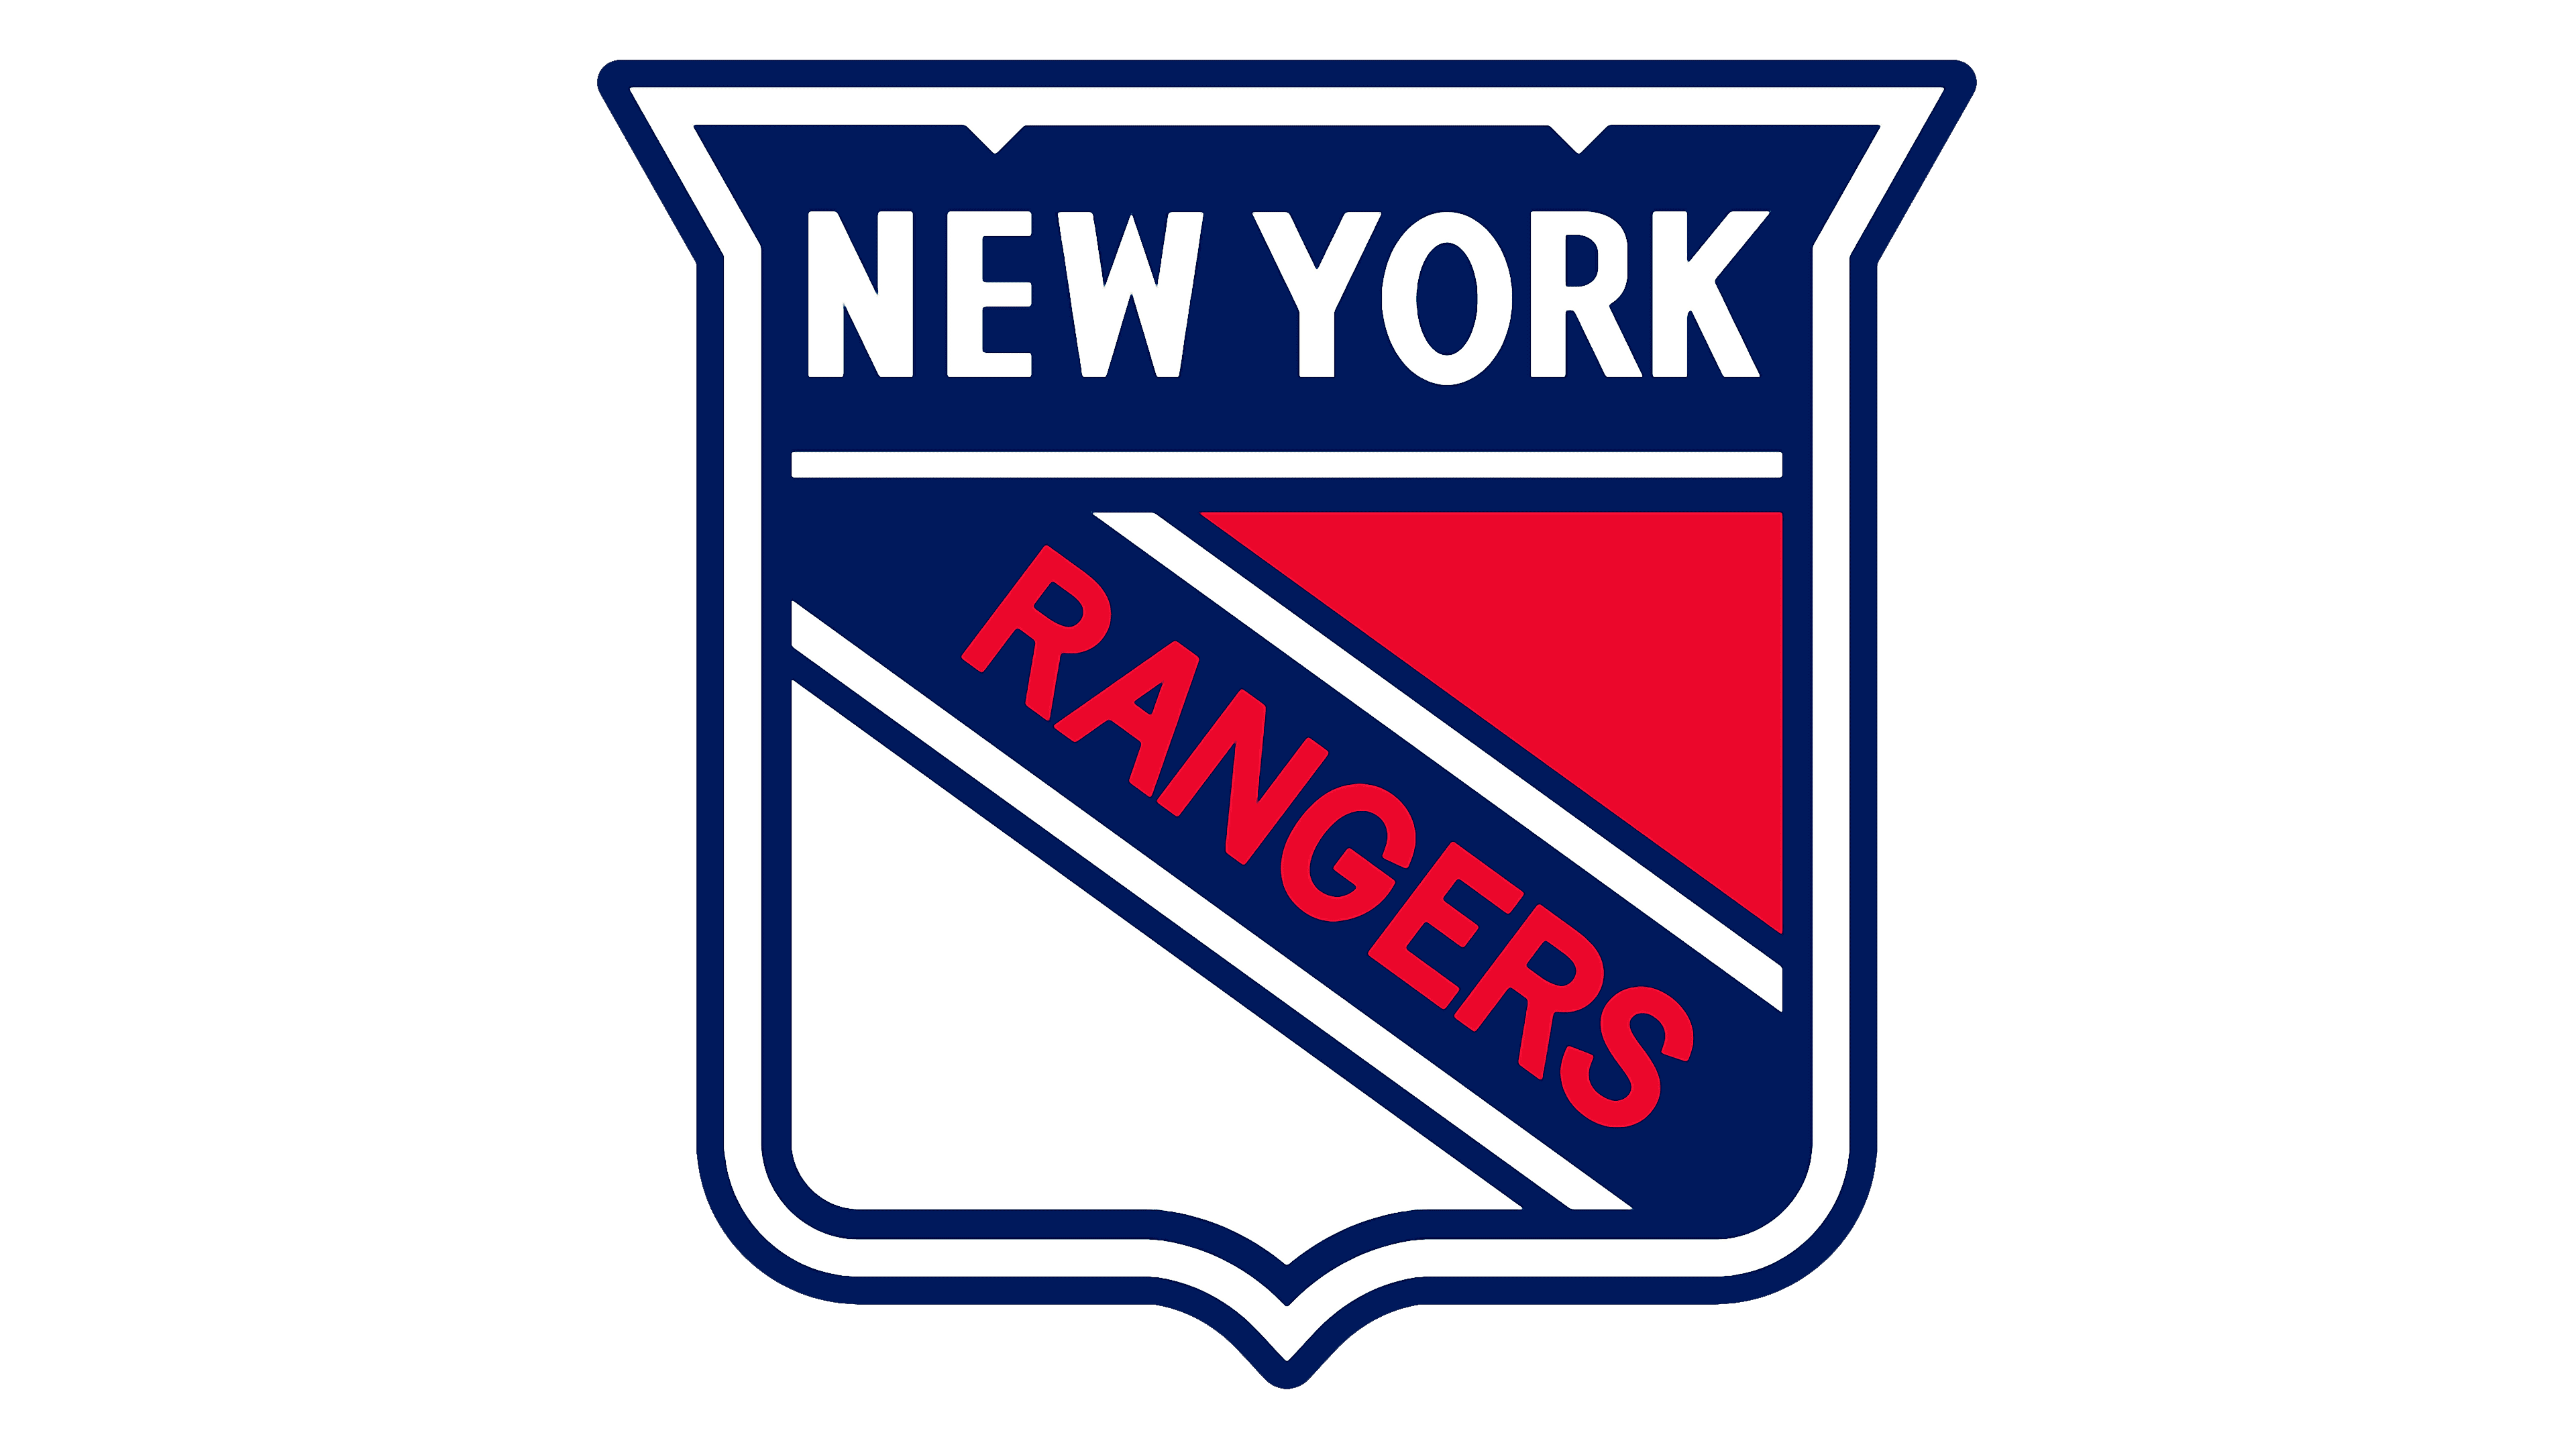 Texas Rangers Logo and symbol, meaning, history, PNG, brand